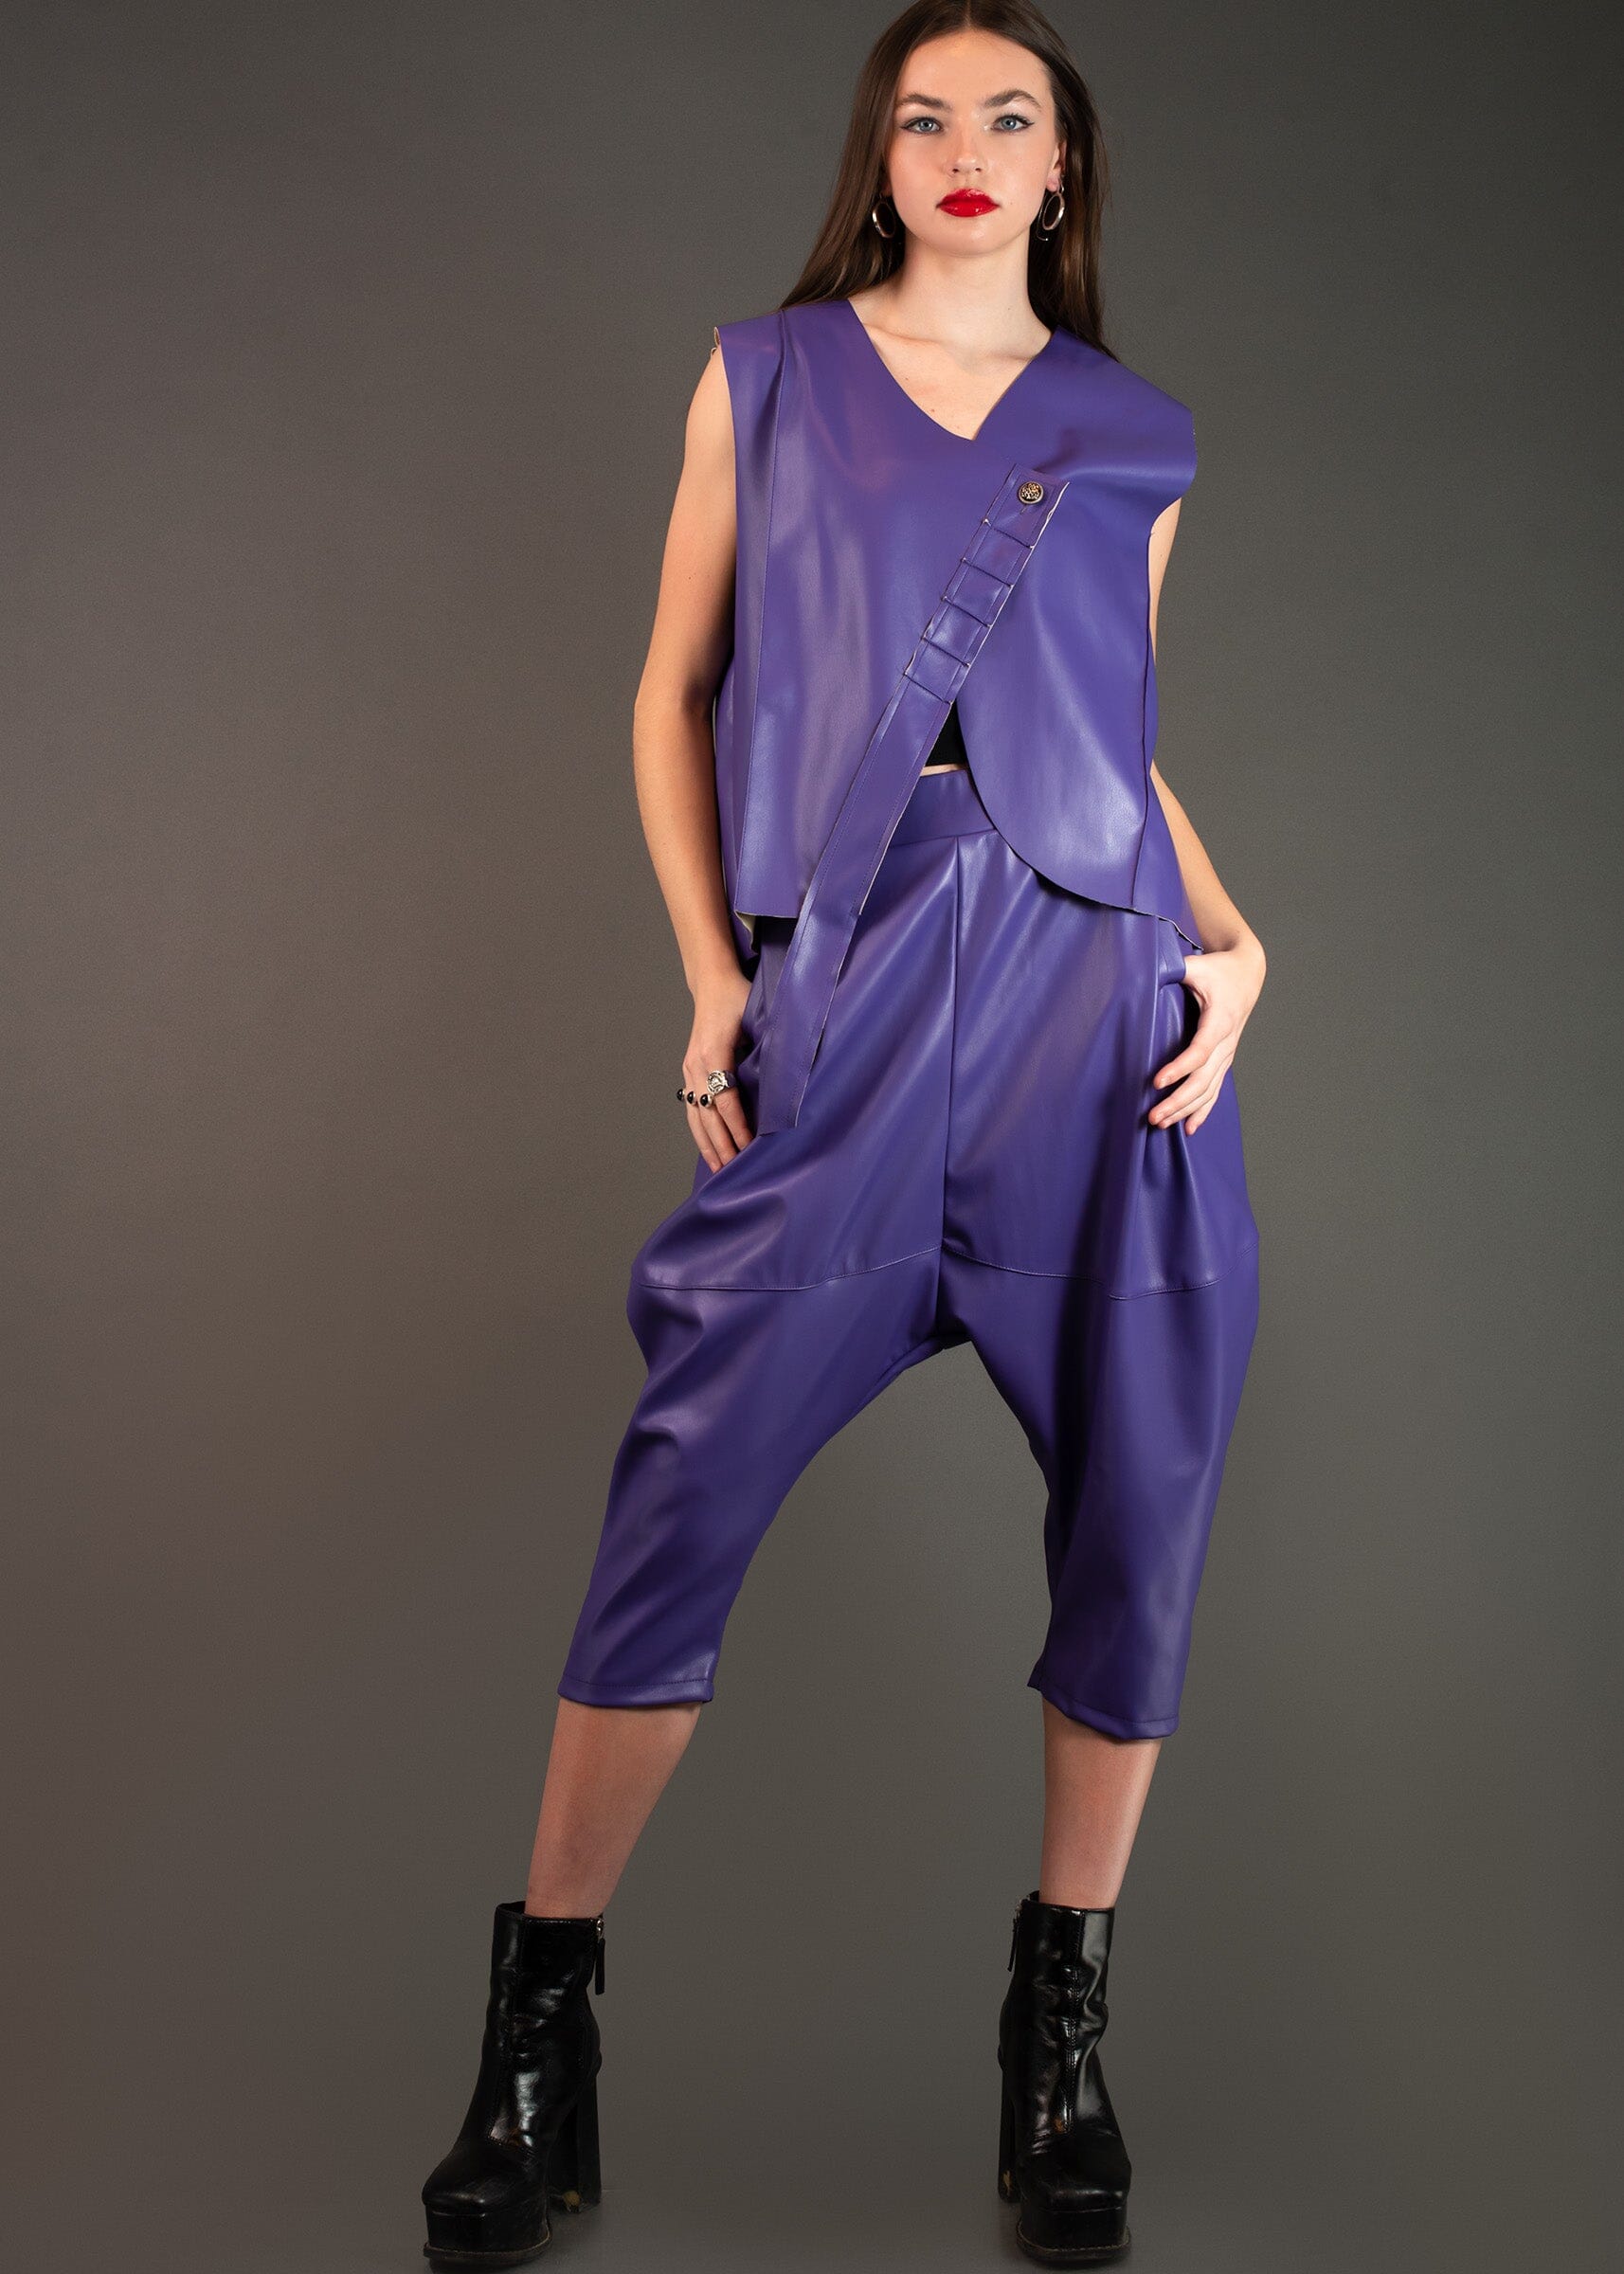 Vegan Leather Two Piece Set Two Piece Sets Kate Hewko 